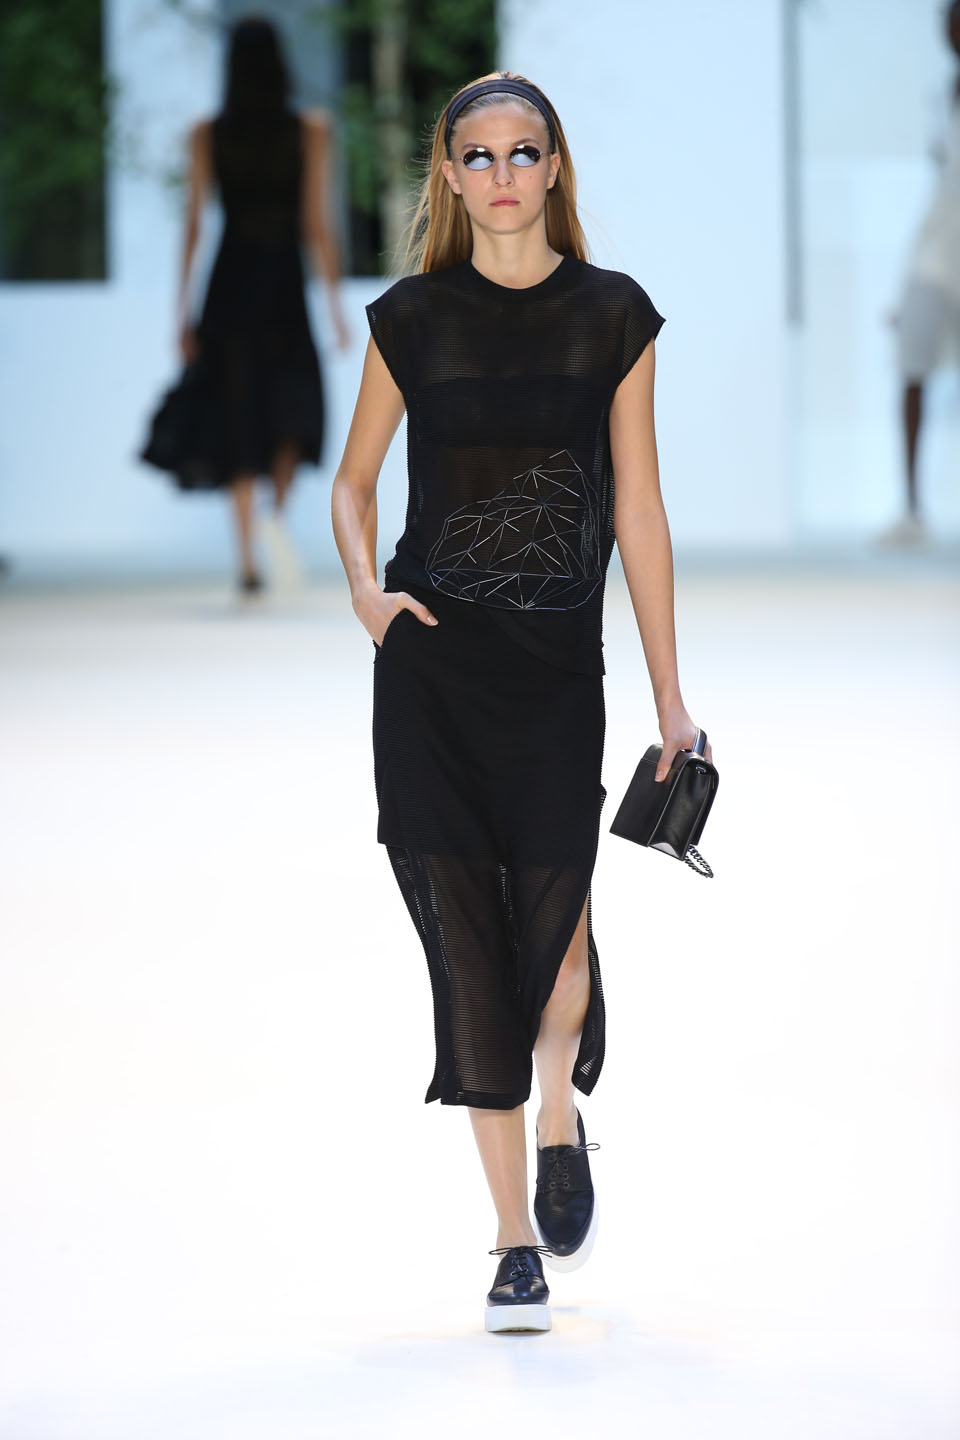 Emeline Ghesquière (Oui) Black techno mesh embroidery top and long panel skirt Anouk City with embellishment